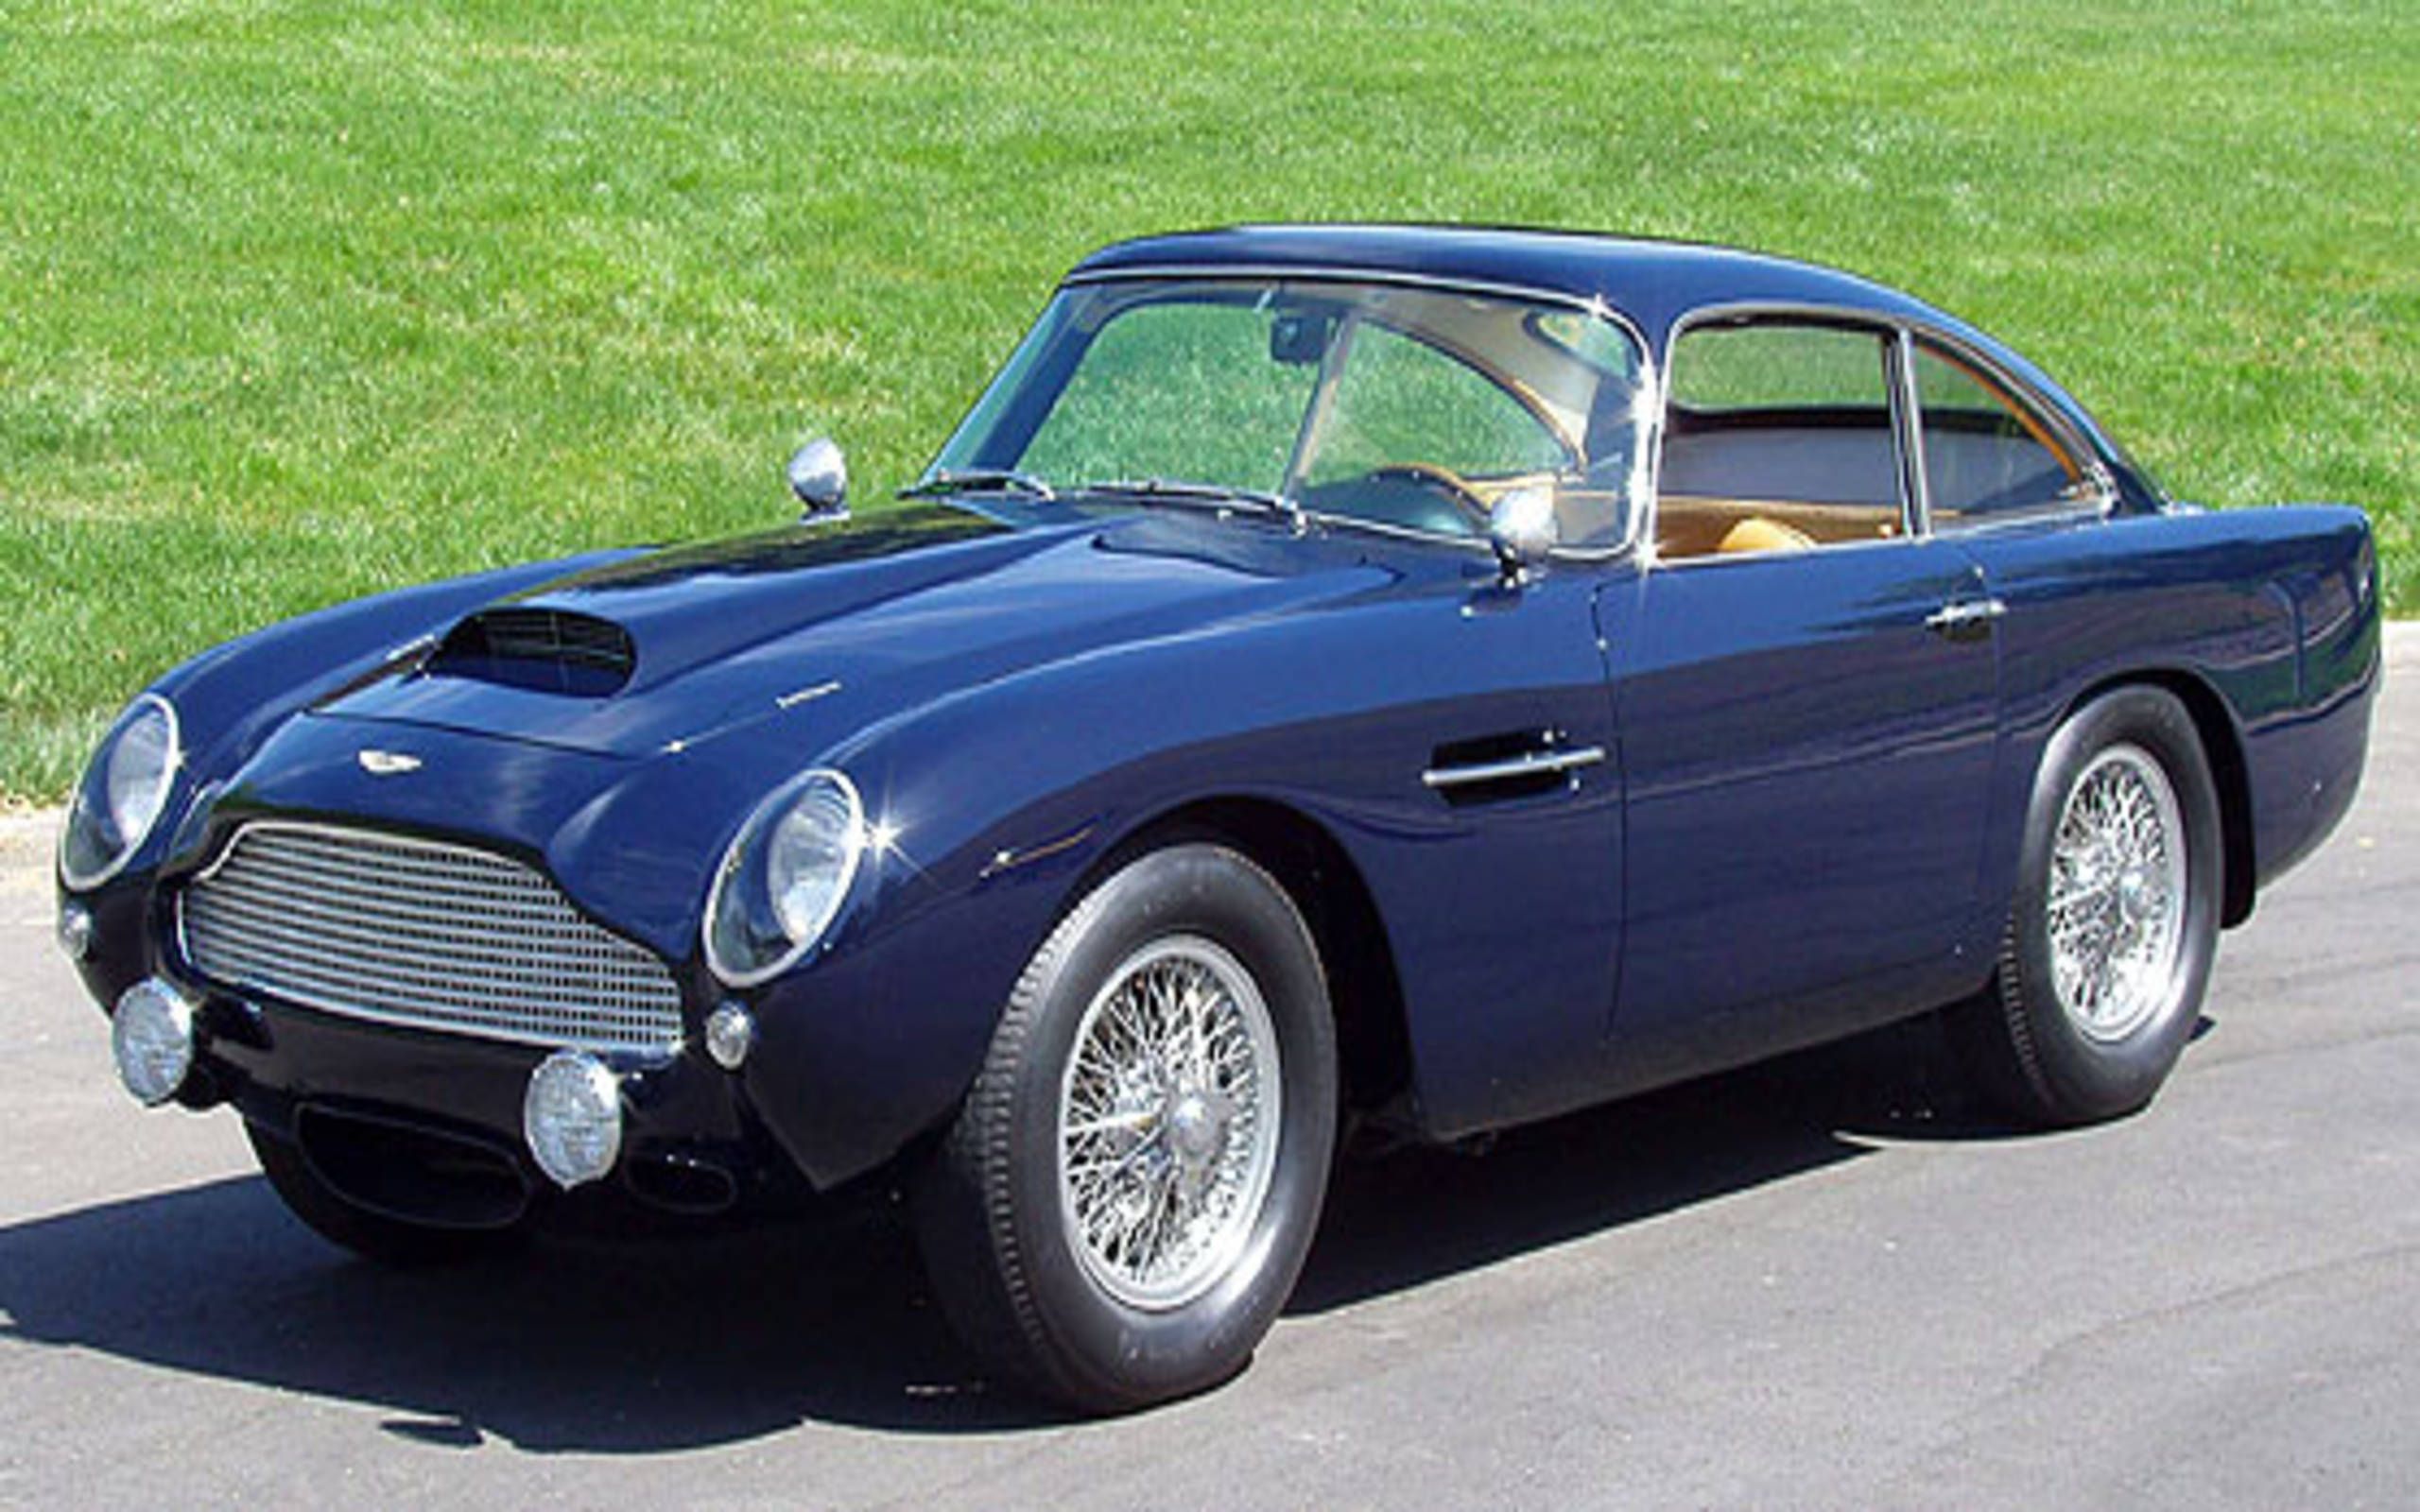 Aston Martin Remakes the Fabled DB4 GT–Costing $1.9 Million